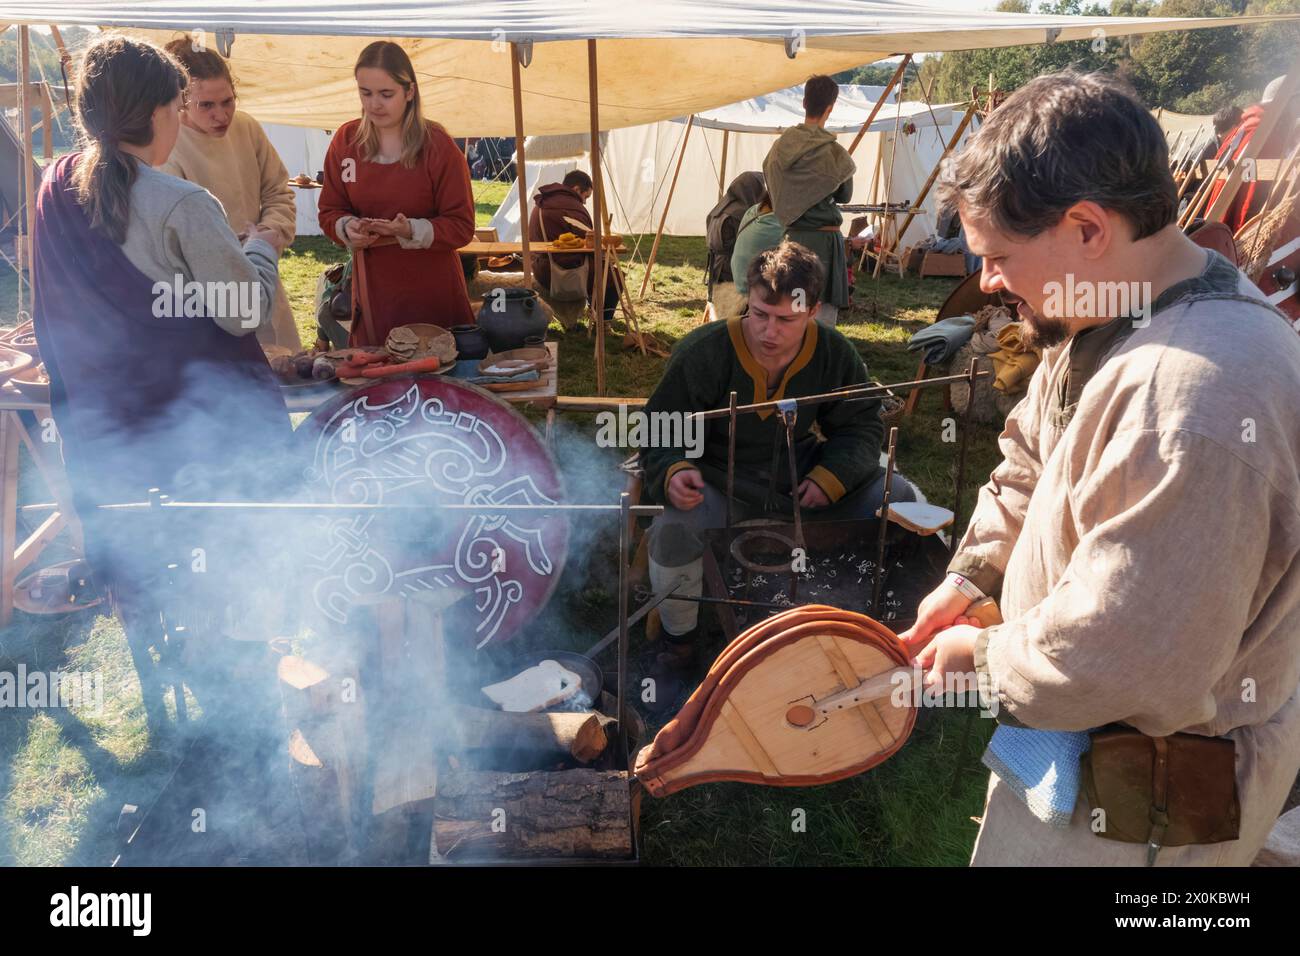 England, East Sussex, Battle, The Annual October Battle of Hastings Re-enactment Festival, Camp Scene with Men Cooking Using Traditional Method Stock Photo